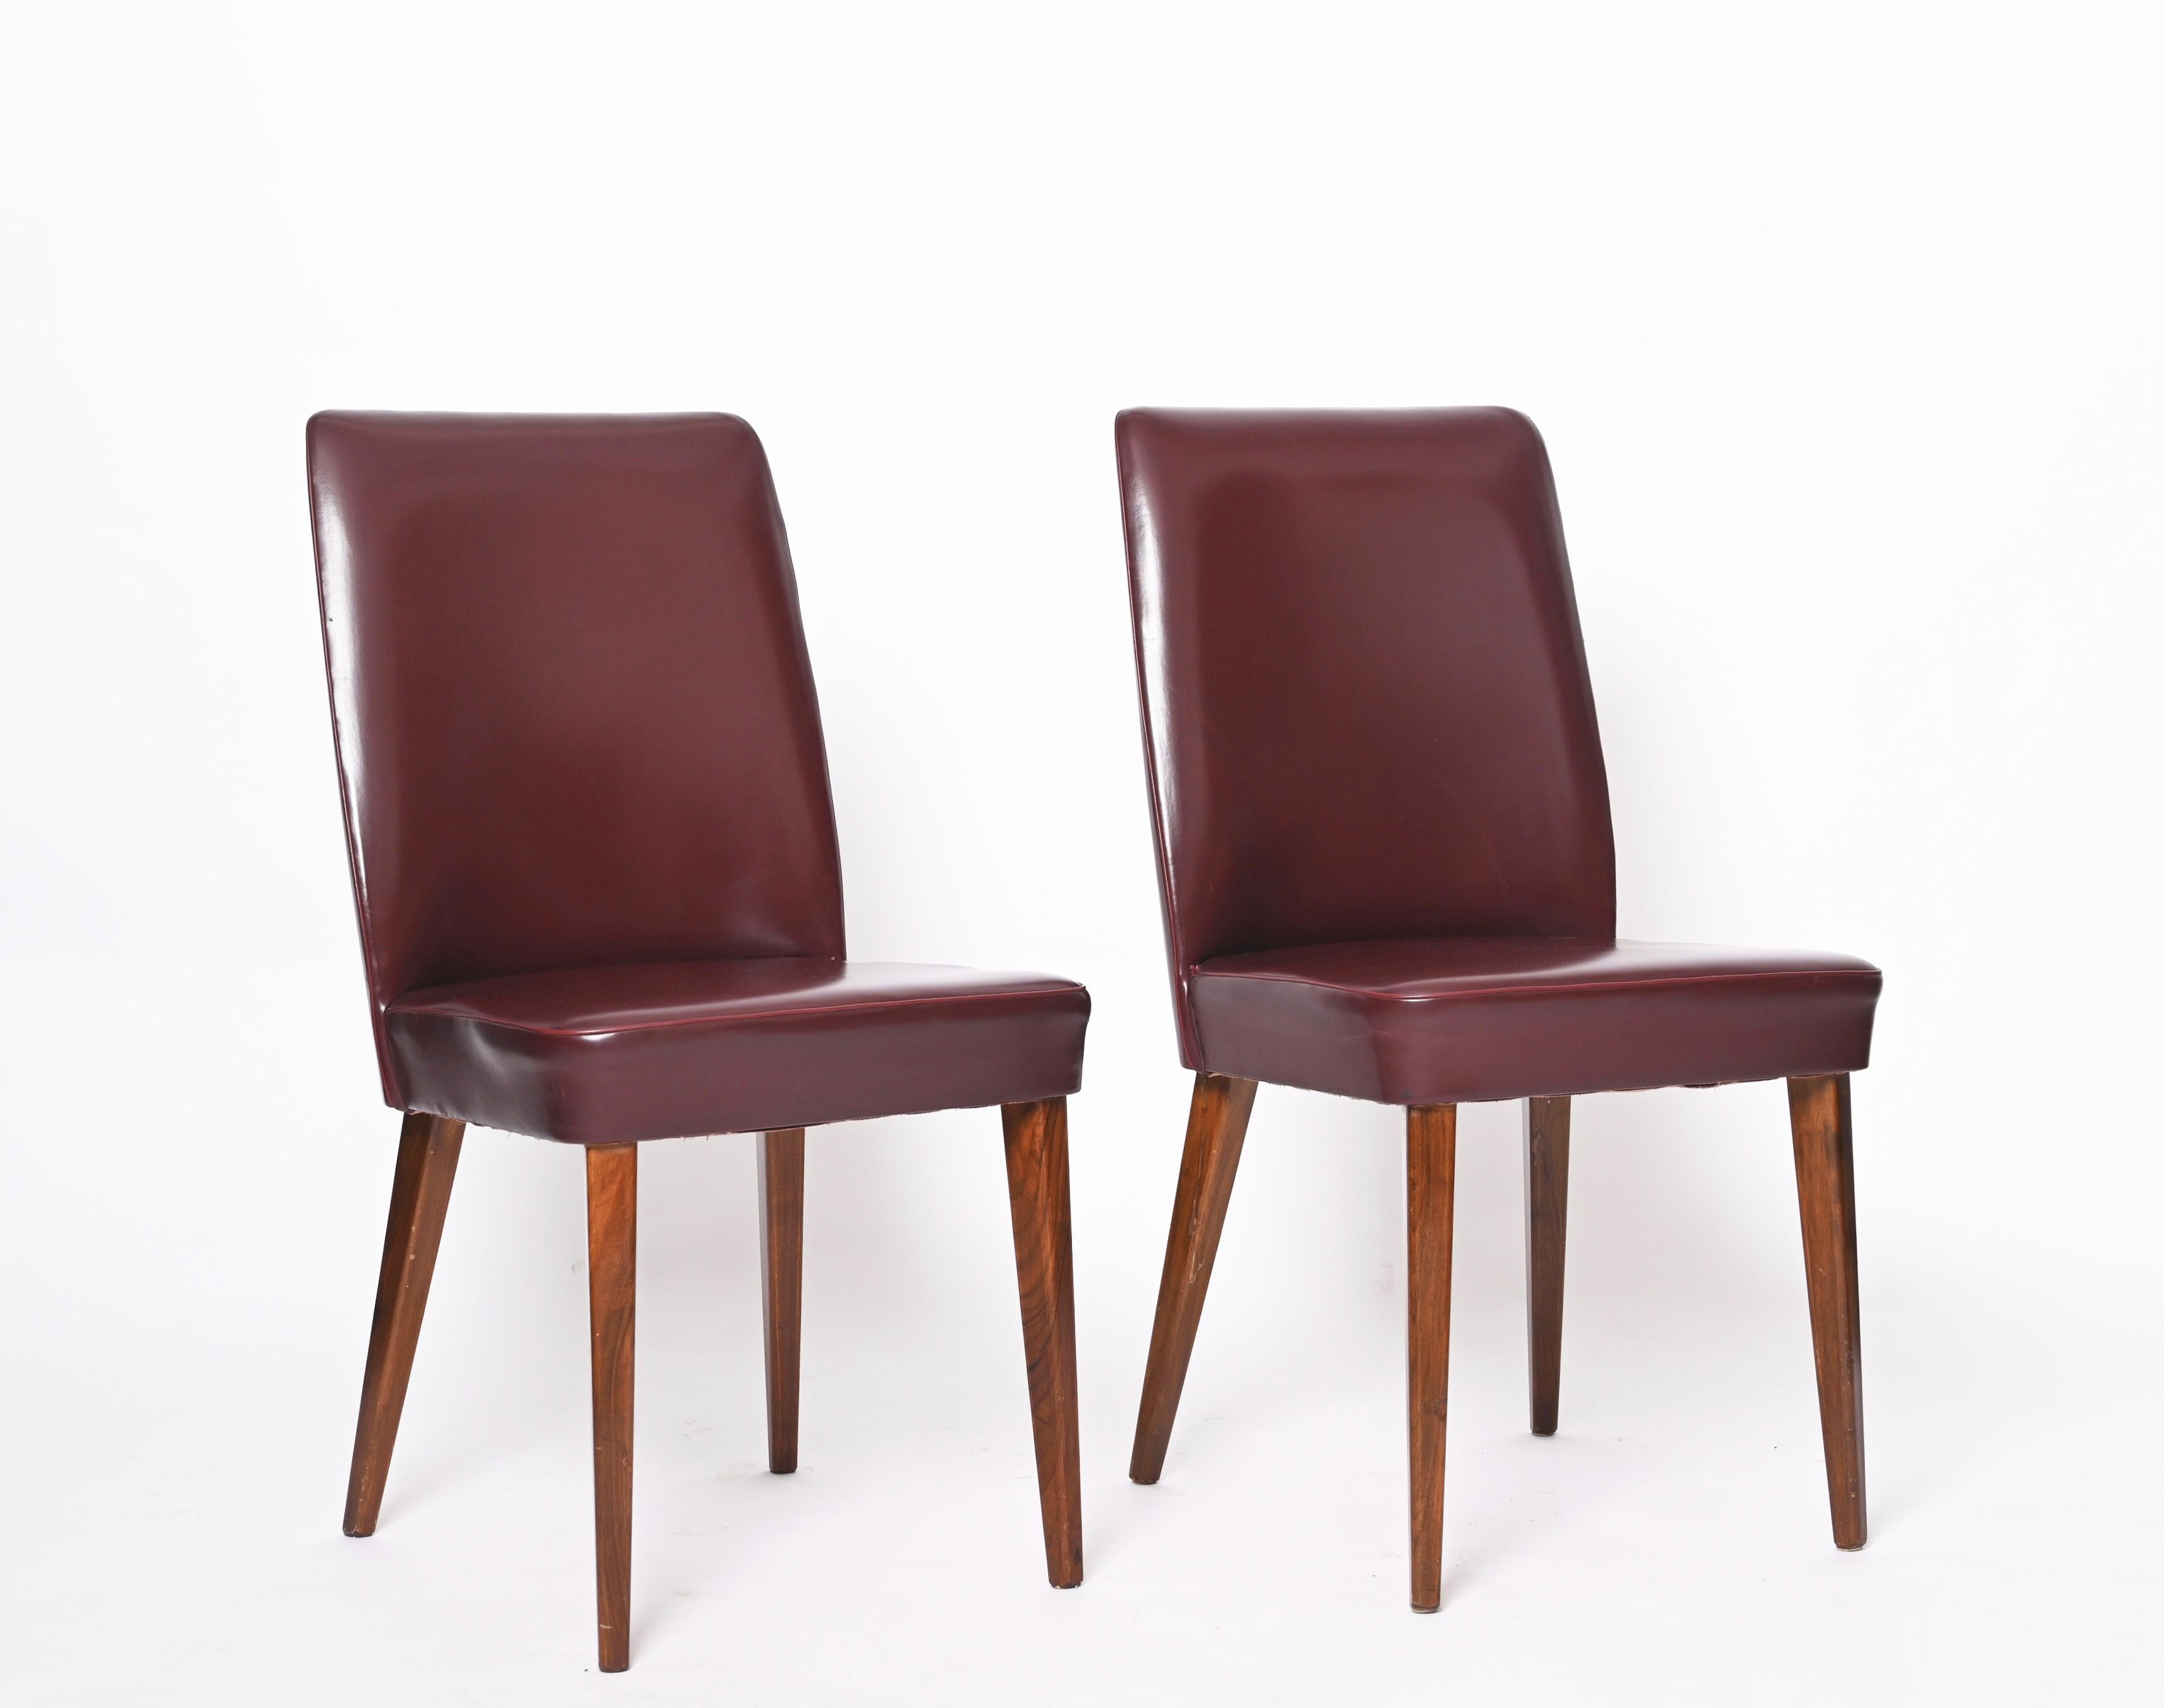 Mid-Century Modern Pair of Bordeaux Leather Chairs by Anonima Castelli, Italy, 1950s For Sale